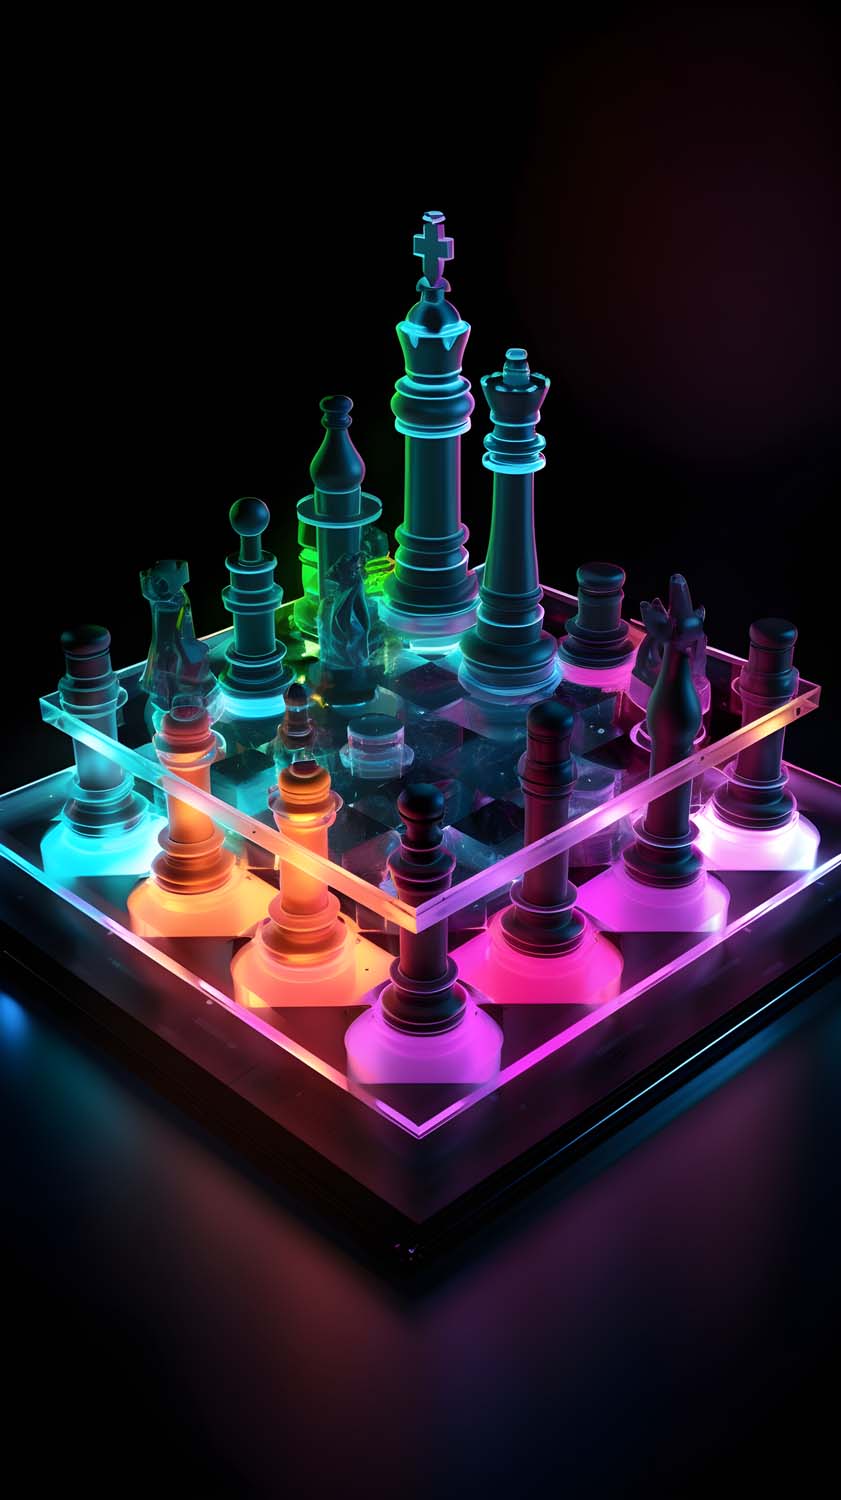 Chess Game Neon iPhone Wallpaper 4K - iPhone Wallpapers